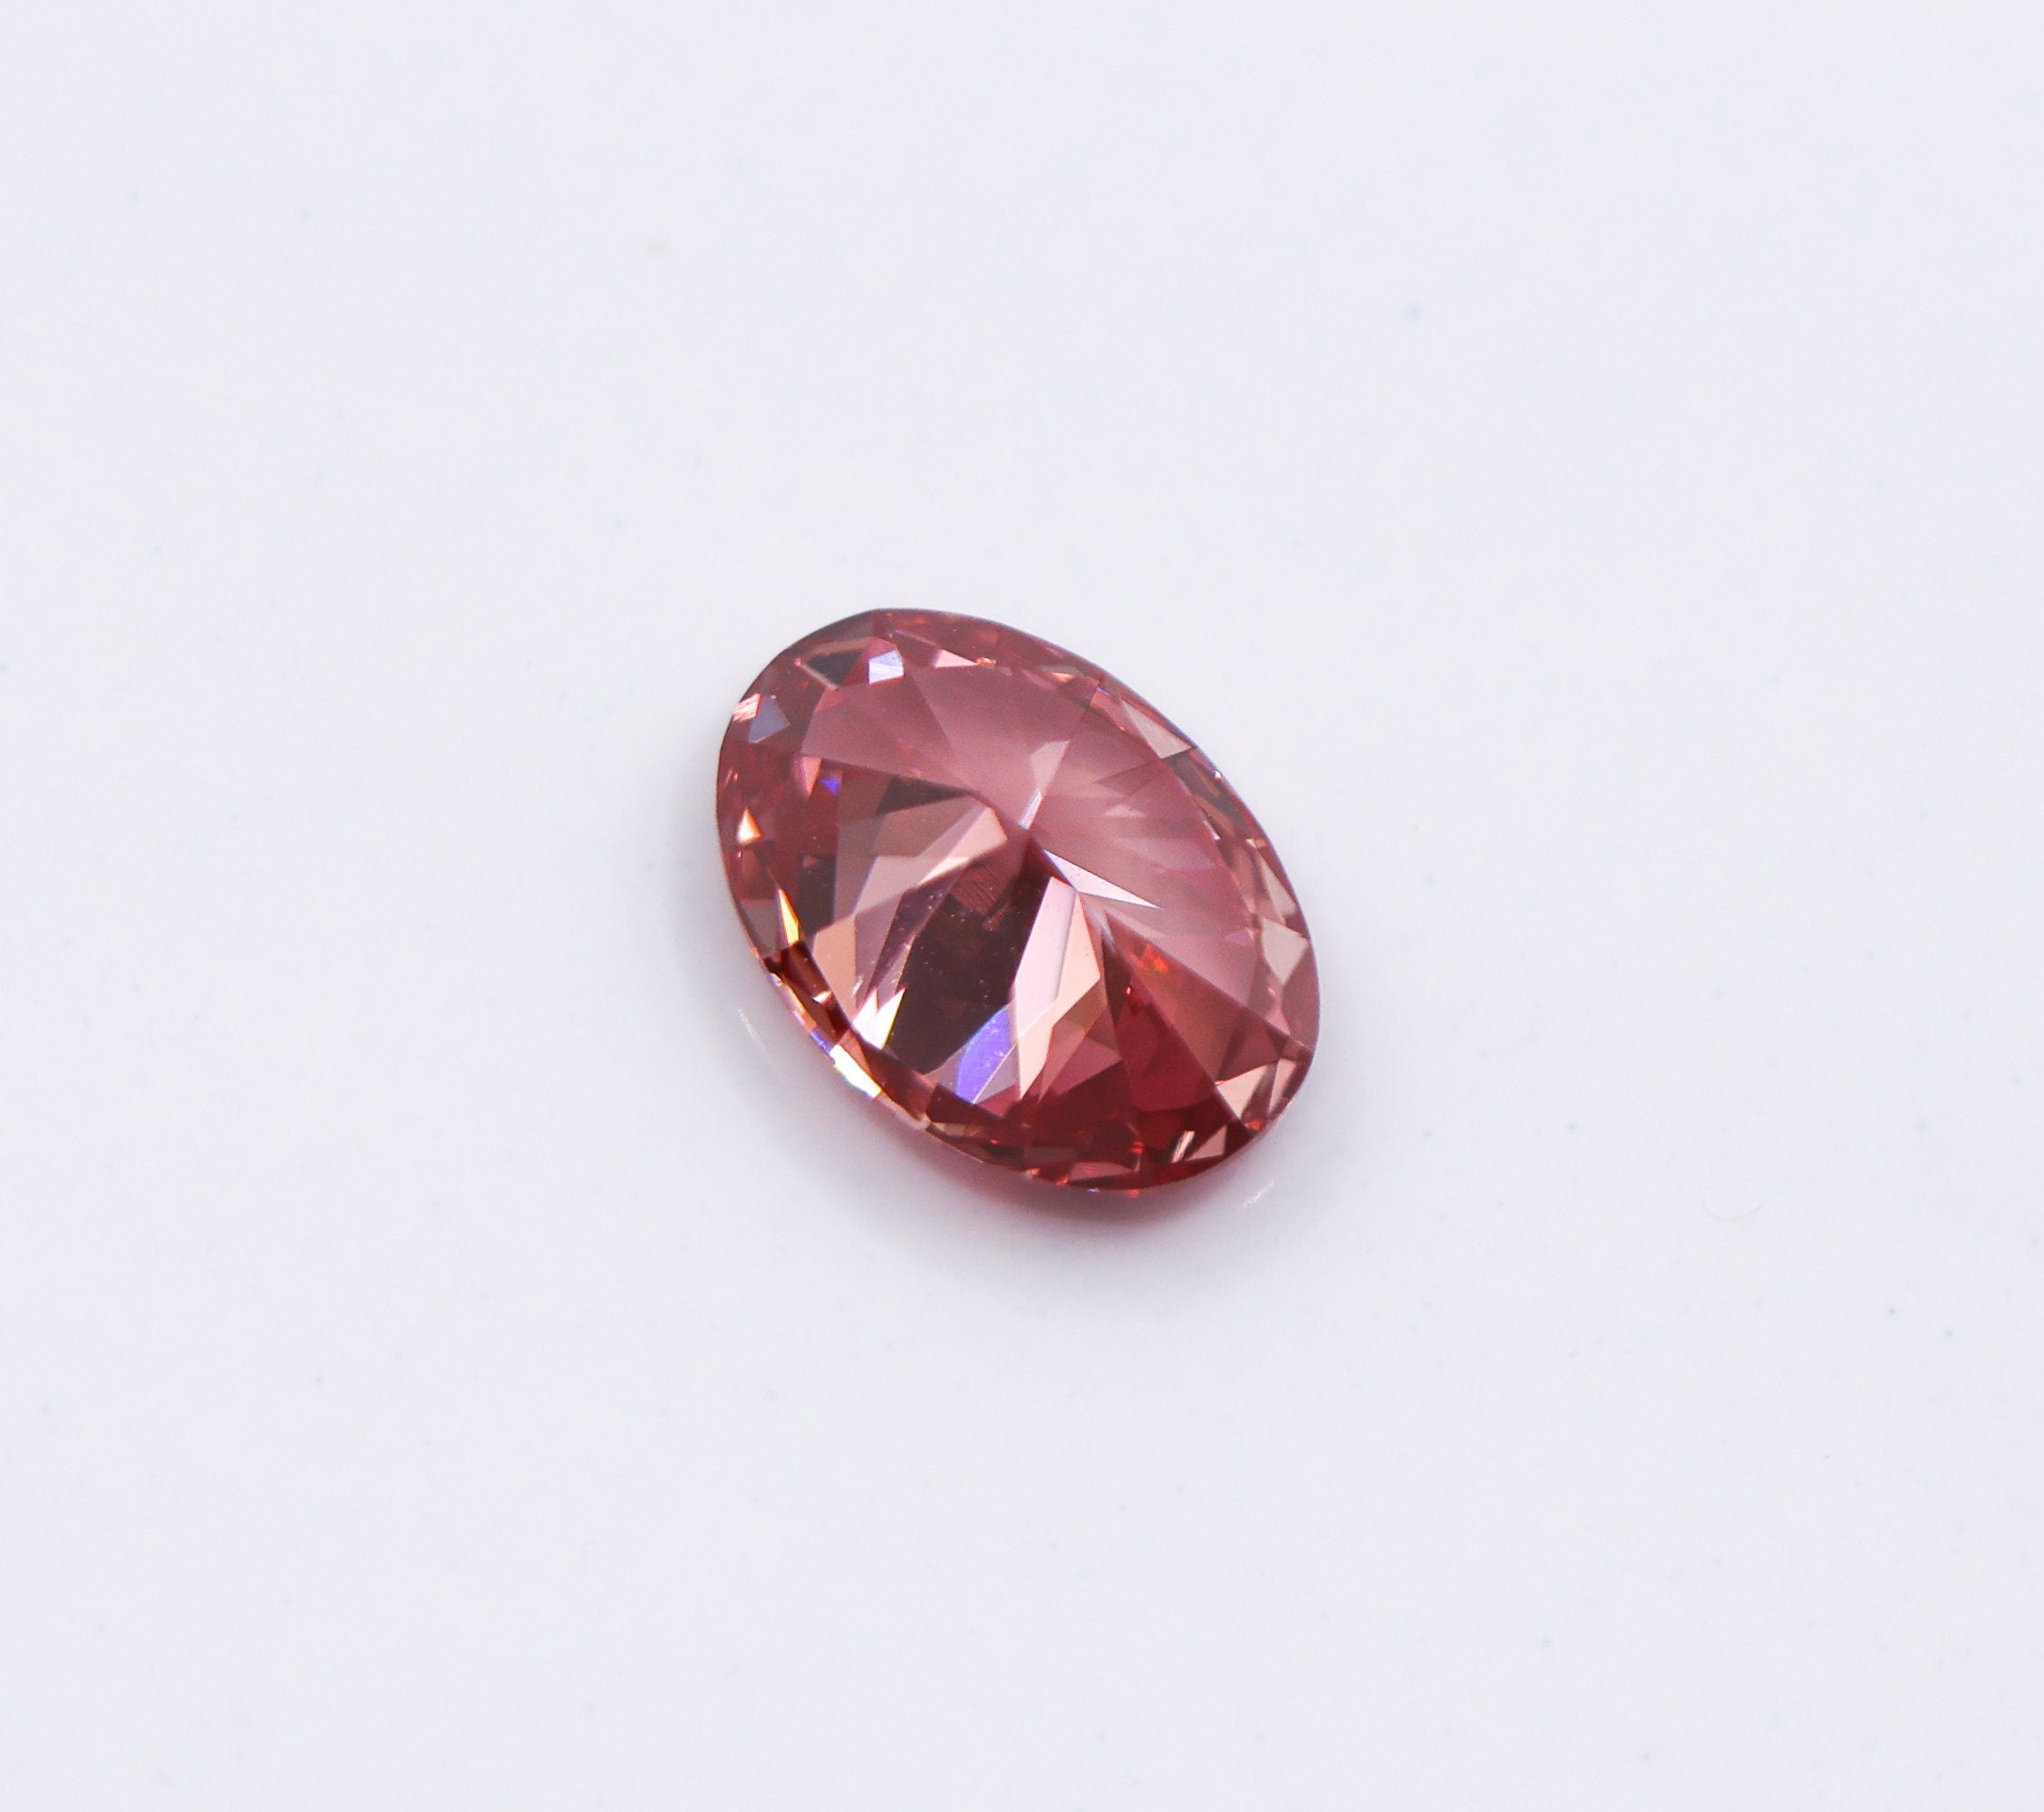 Gemstones-GIA Certified VVS1 Fancy Deep Pink Diamond | Natural Earth Mined | 2.31 Carat | Oval Brilliant | Loose Gemstone | Heirloom Diamond - NNJGemstones